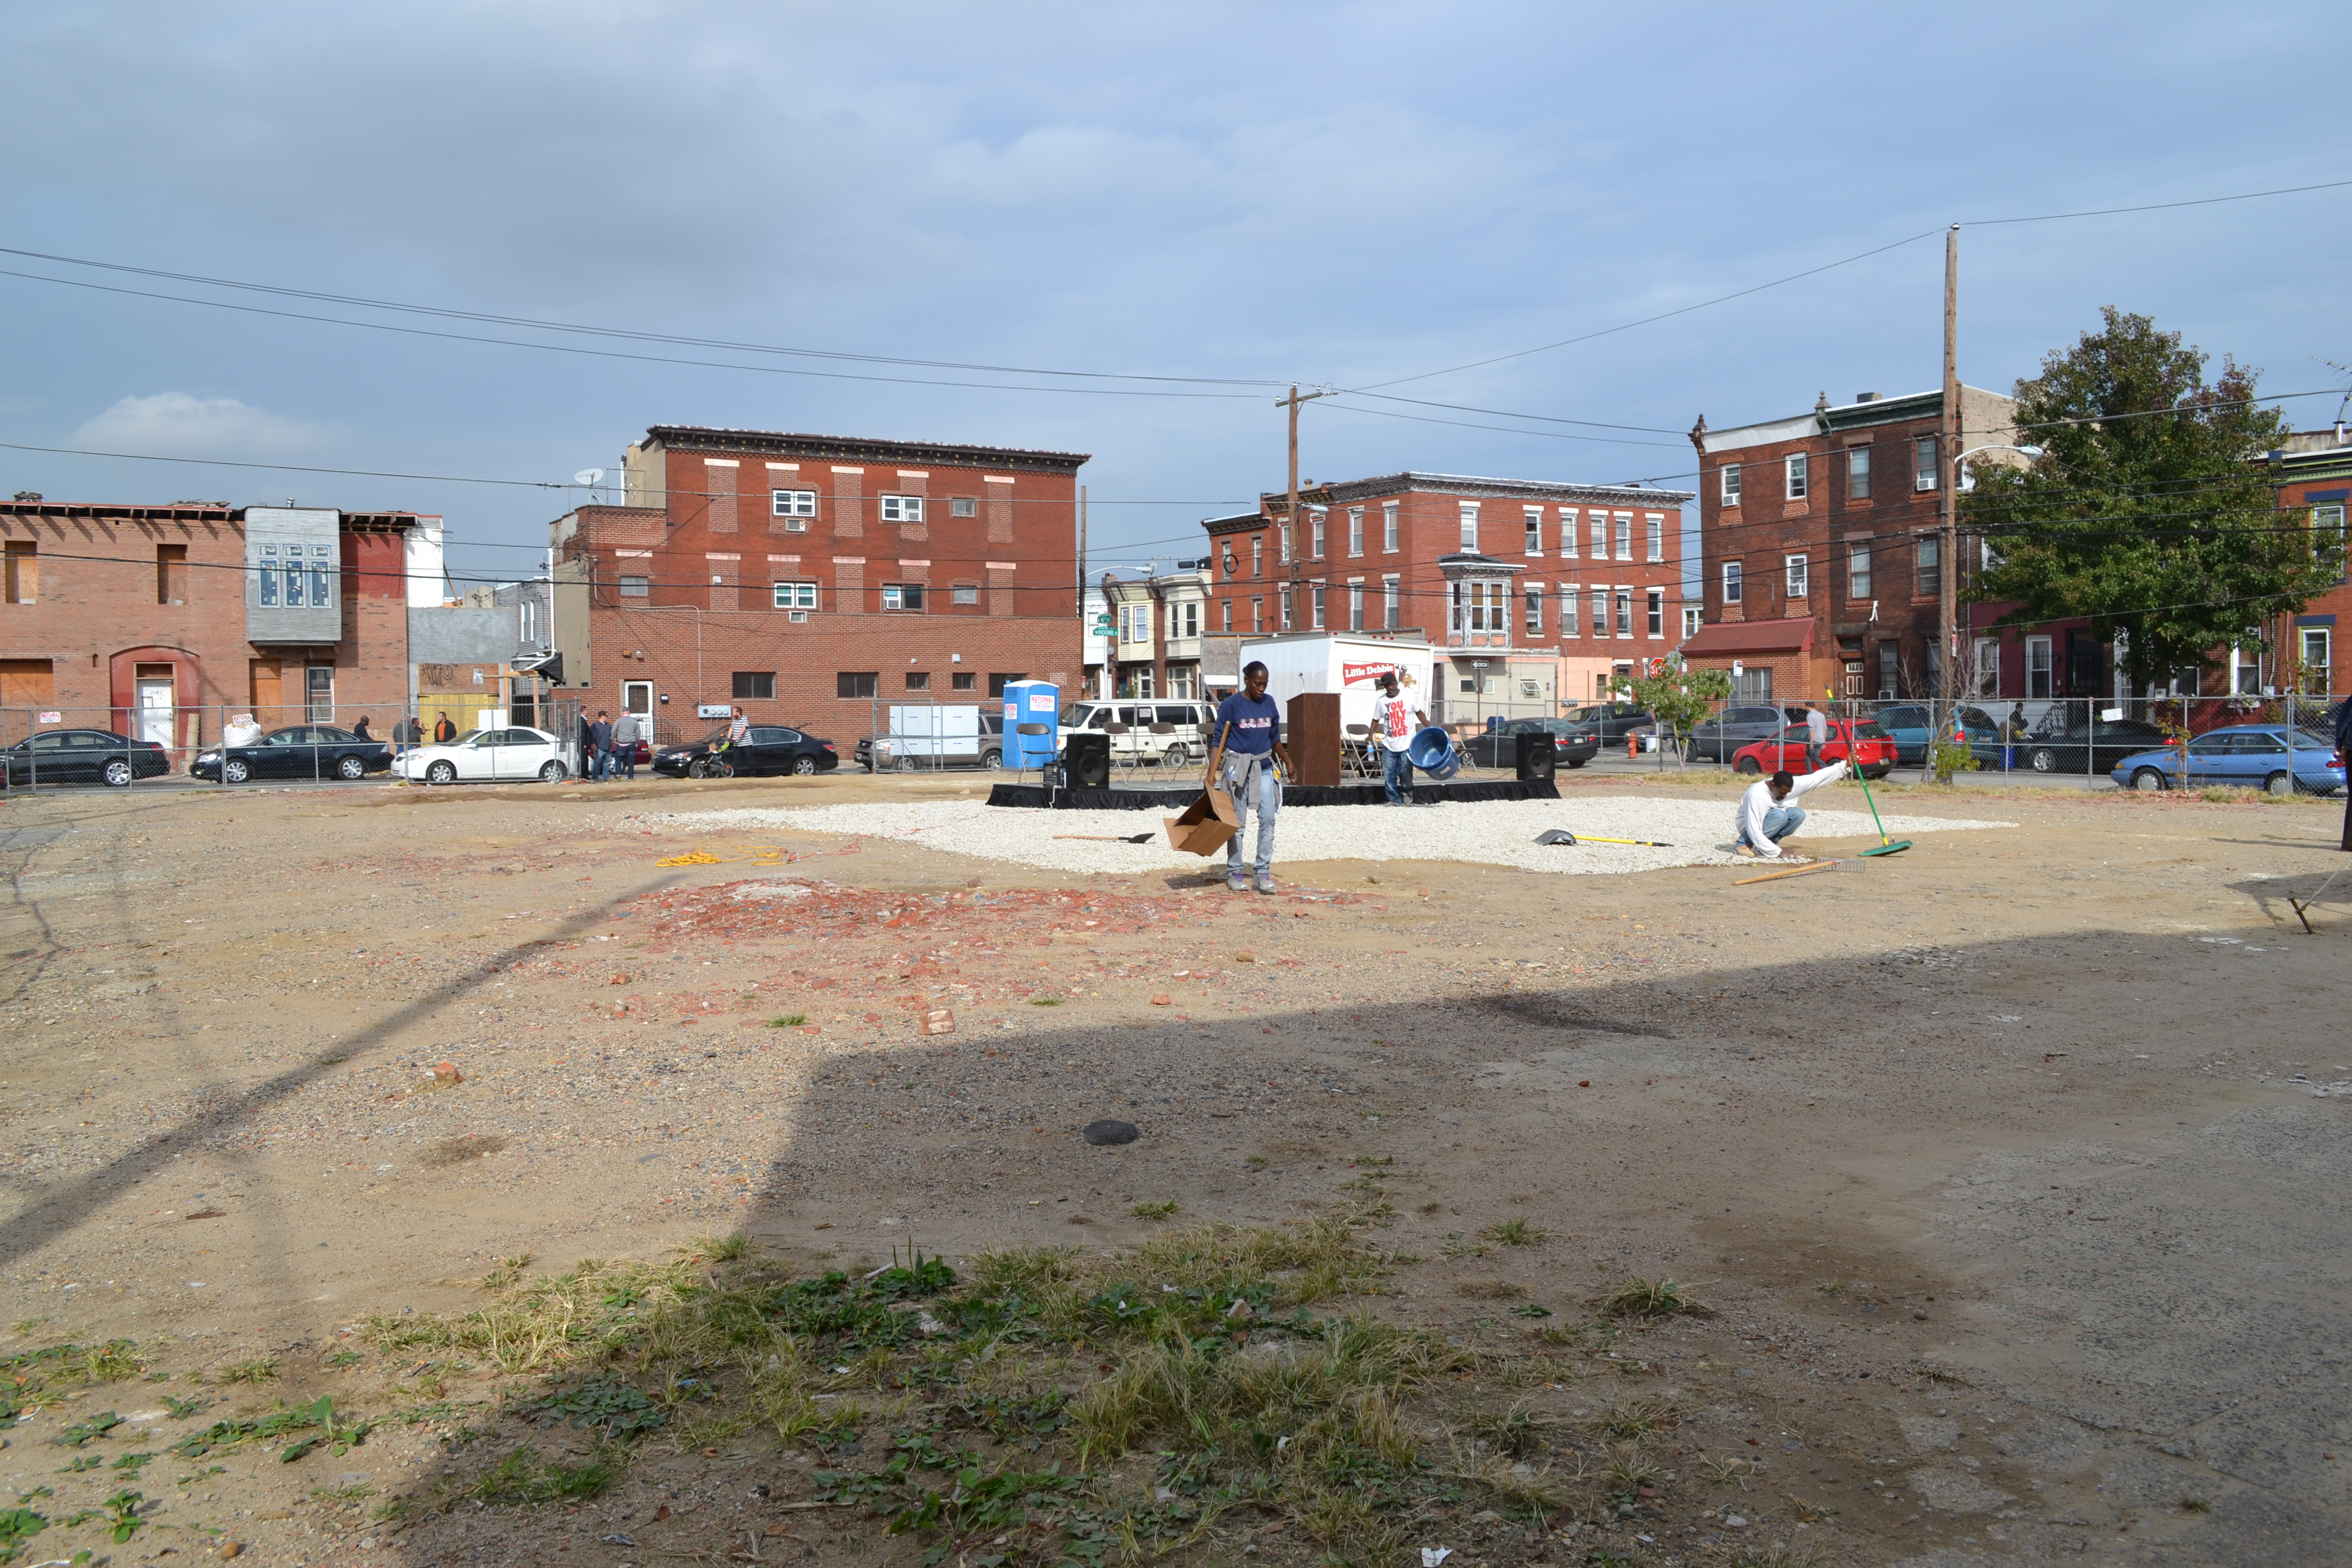 reNewbold will fill this vacant lot with 16 rowhomes, two condos and one retail space